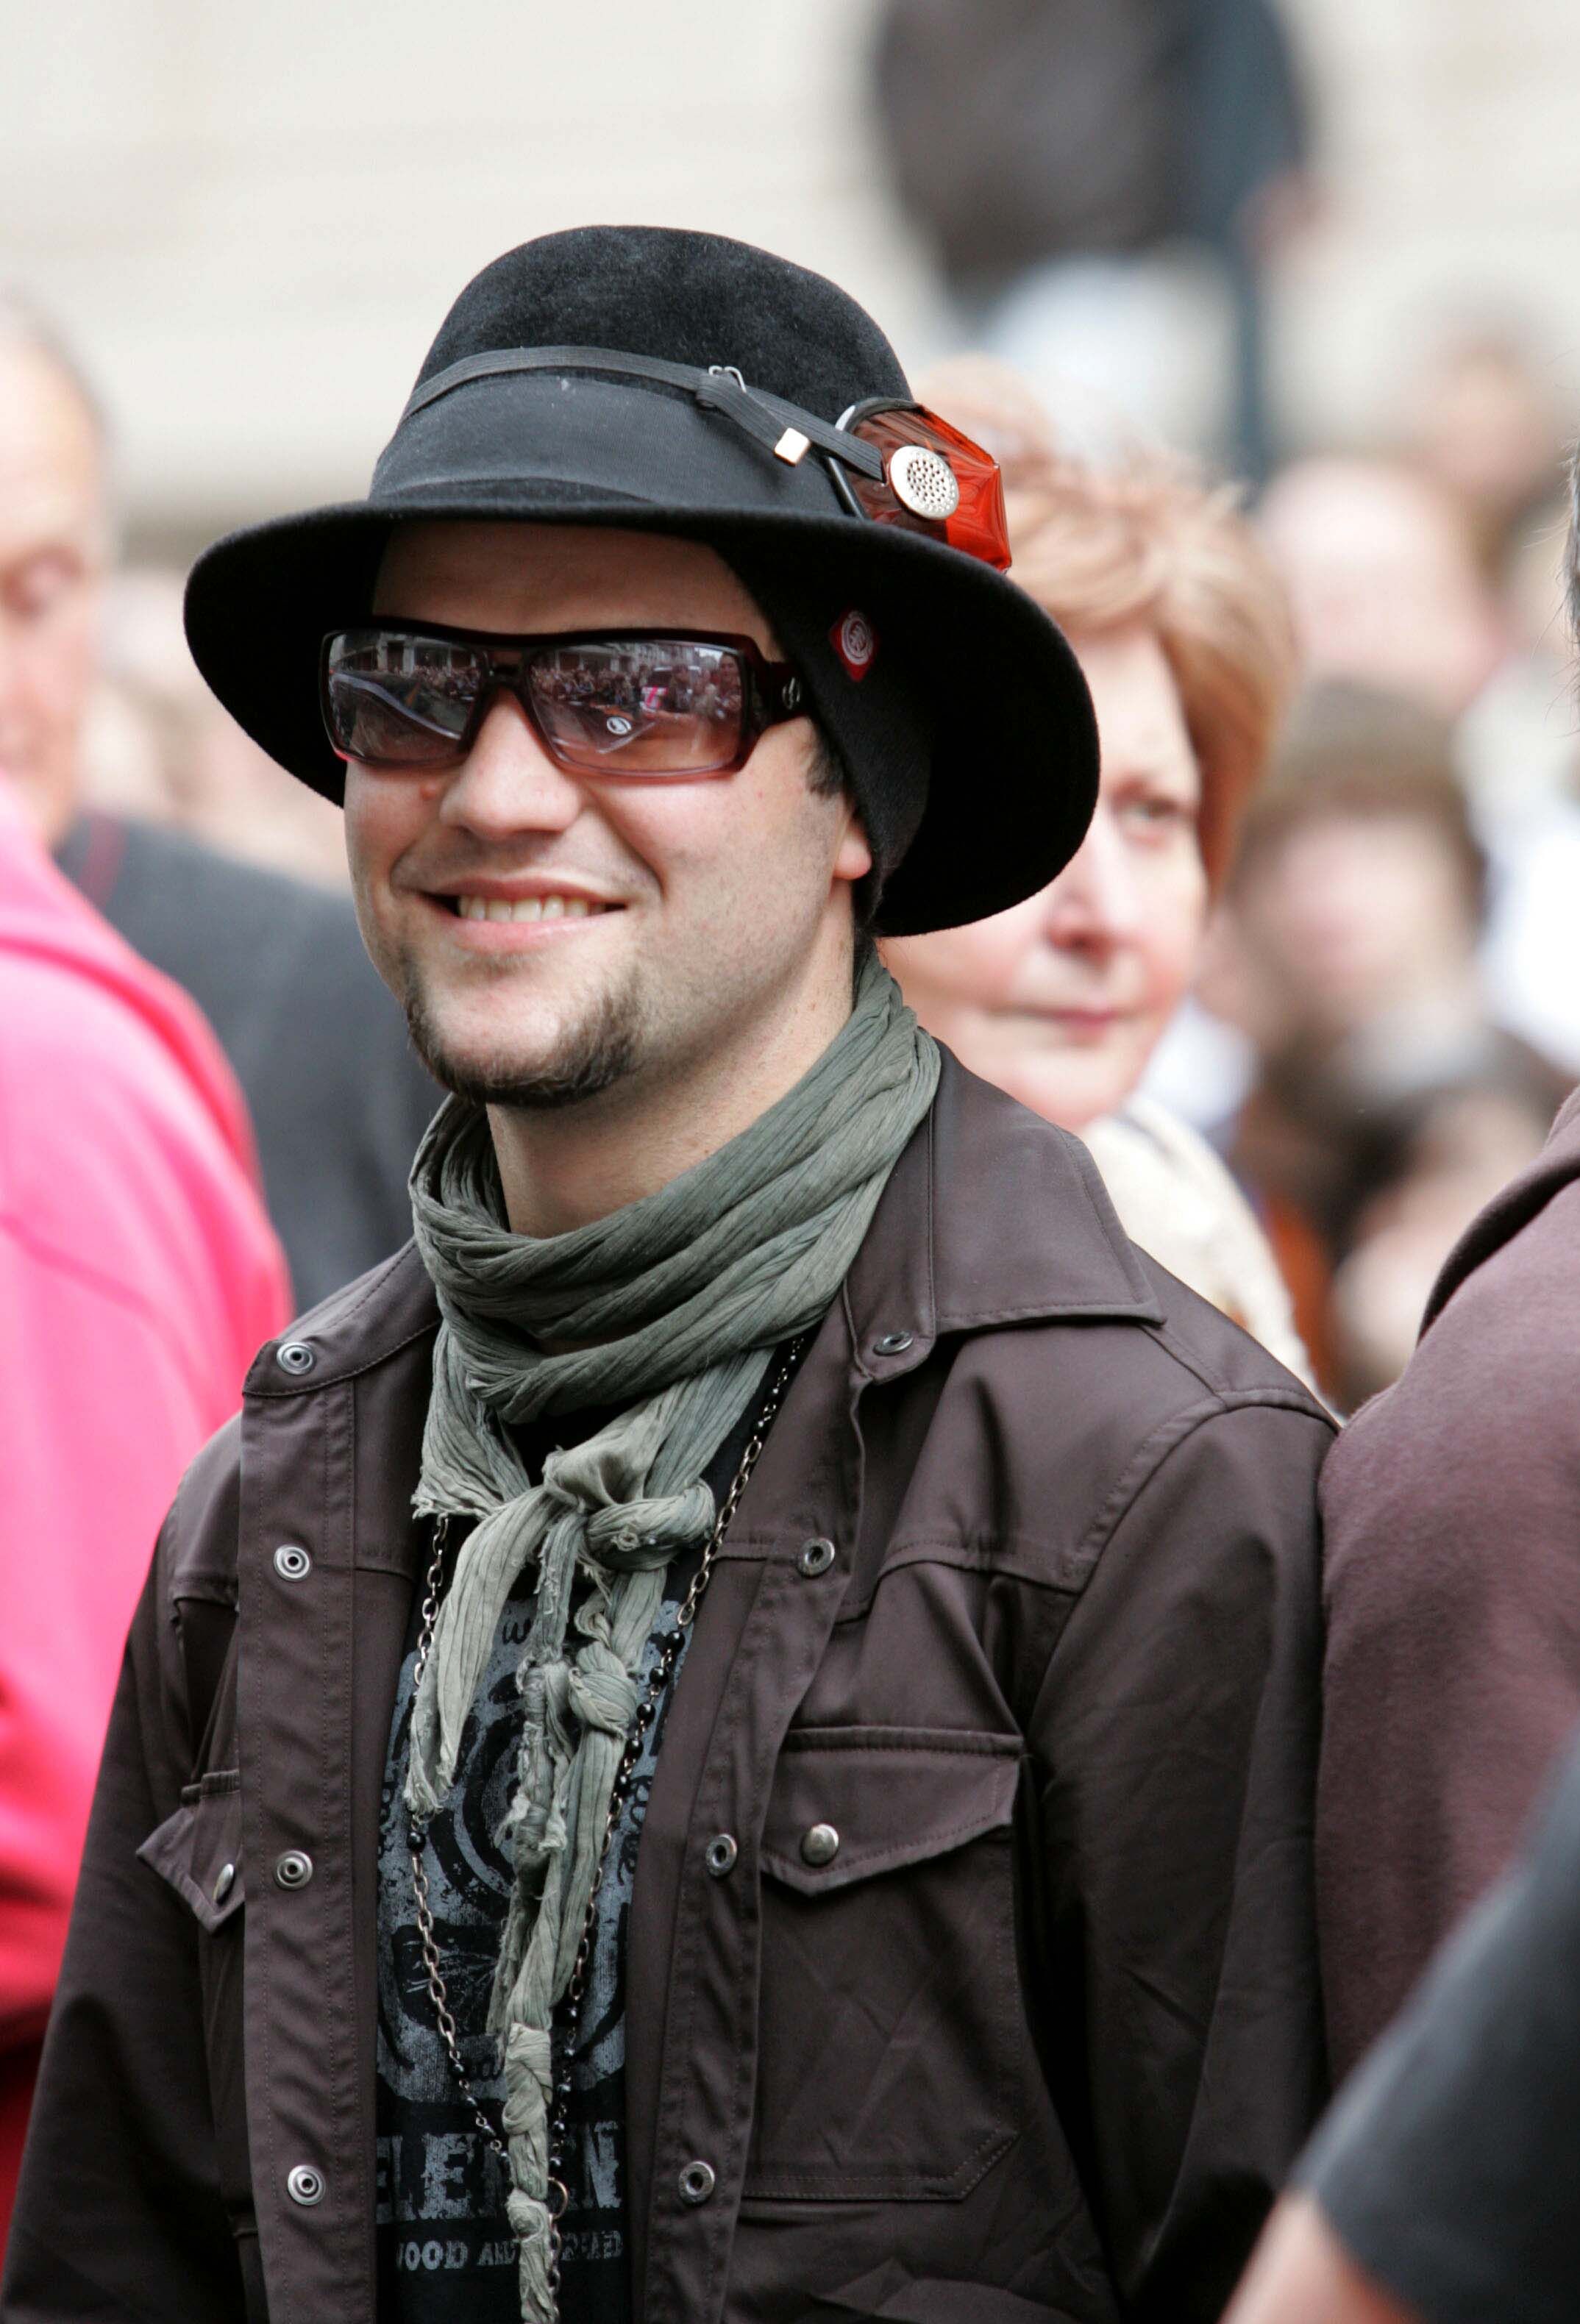 Bam Margera in a black hat smiling